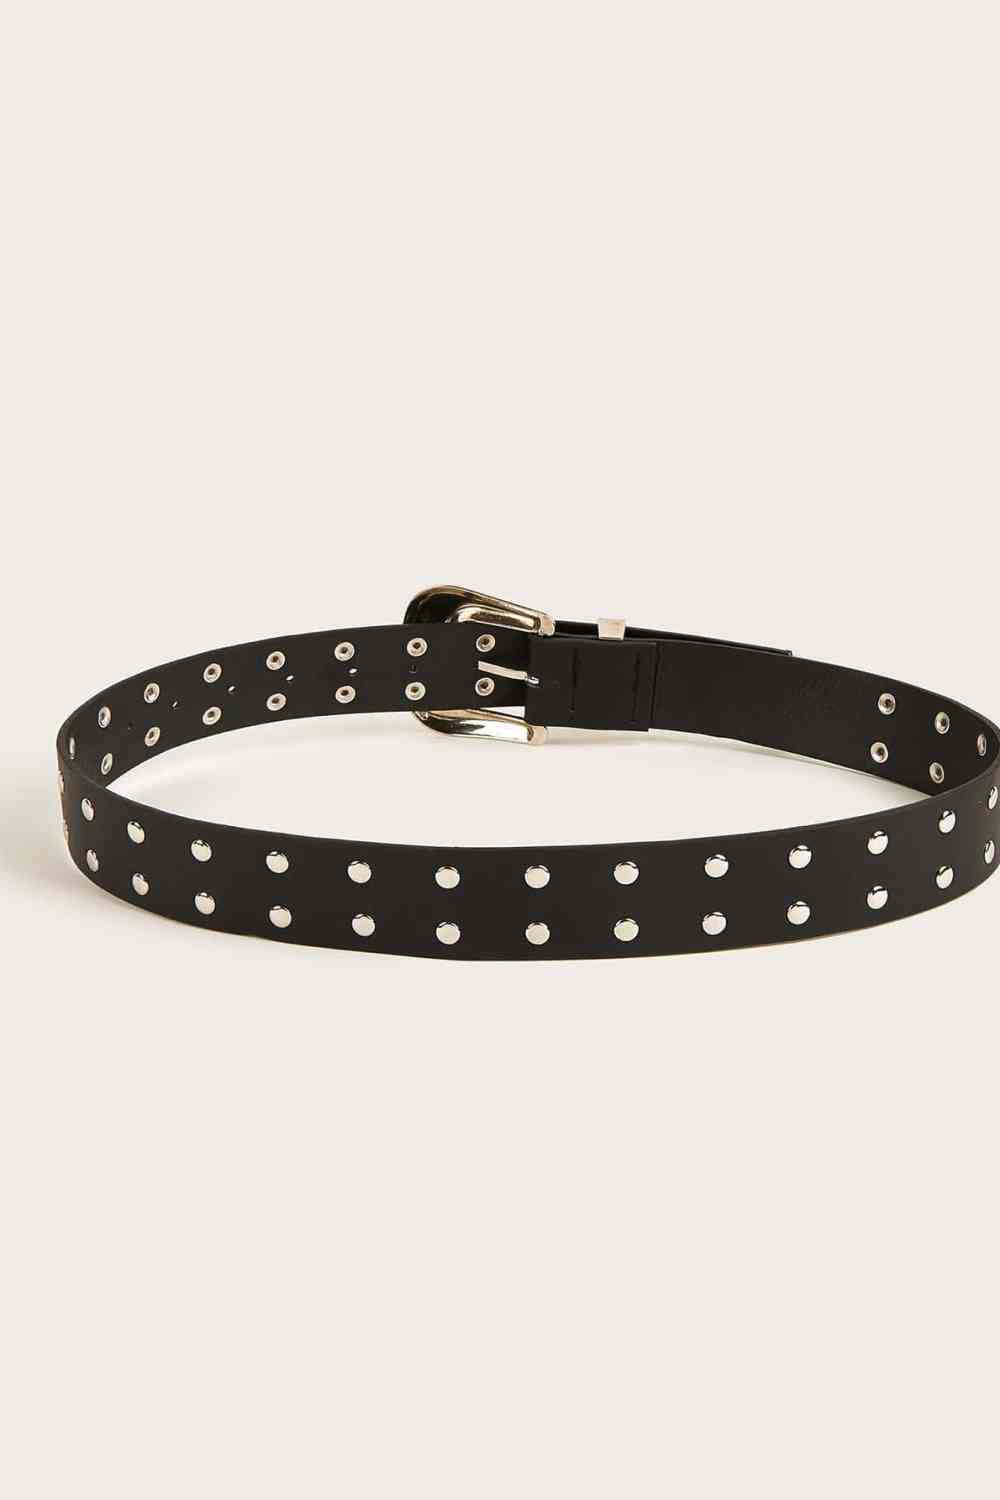 Beige Double Row Studded PU Leather Belt Sentient Beauty Fashions Apparel &amp; Accessories